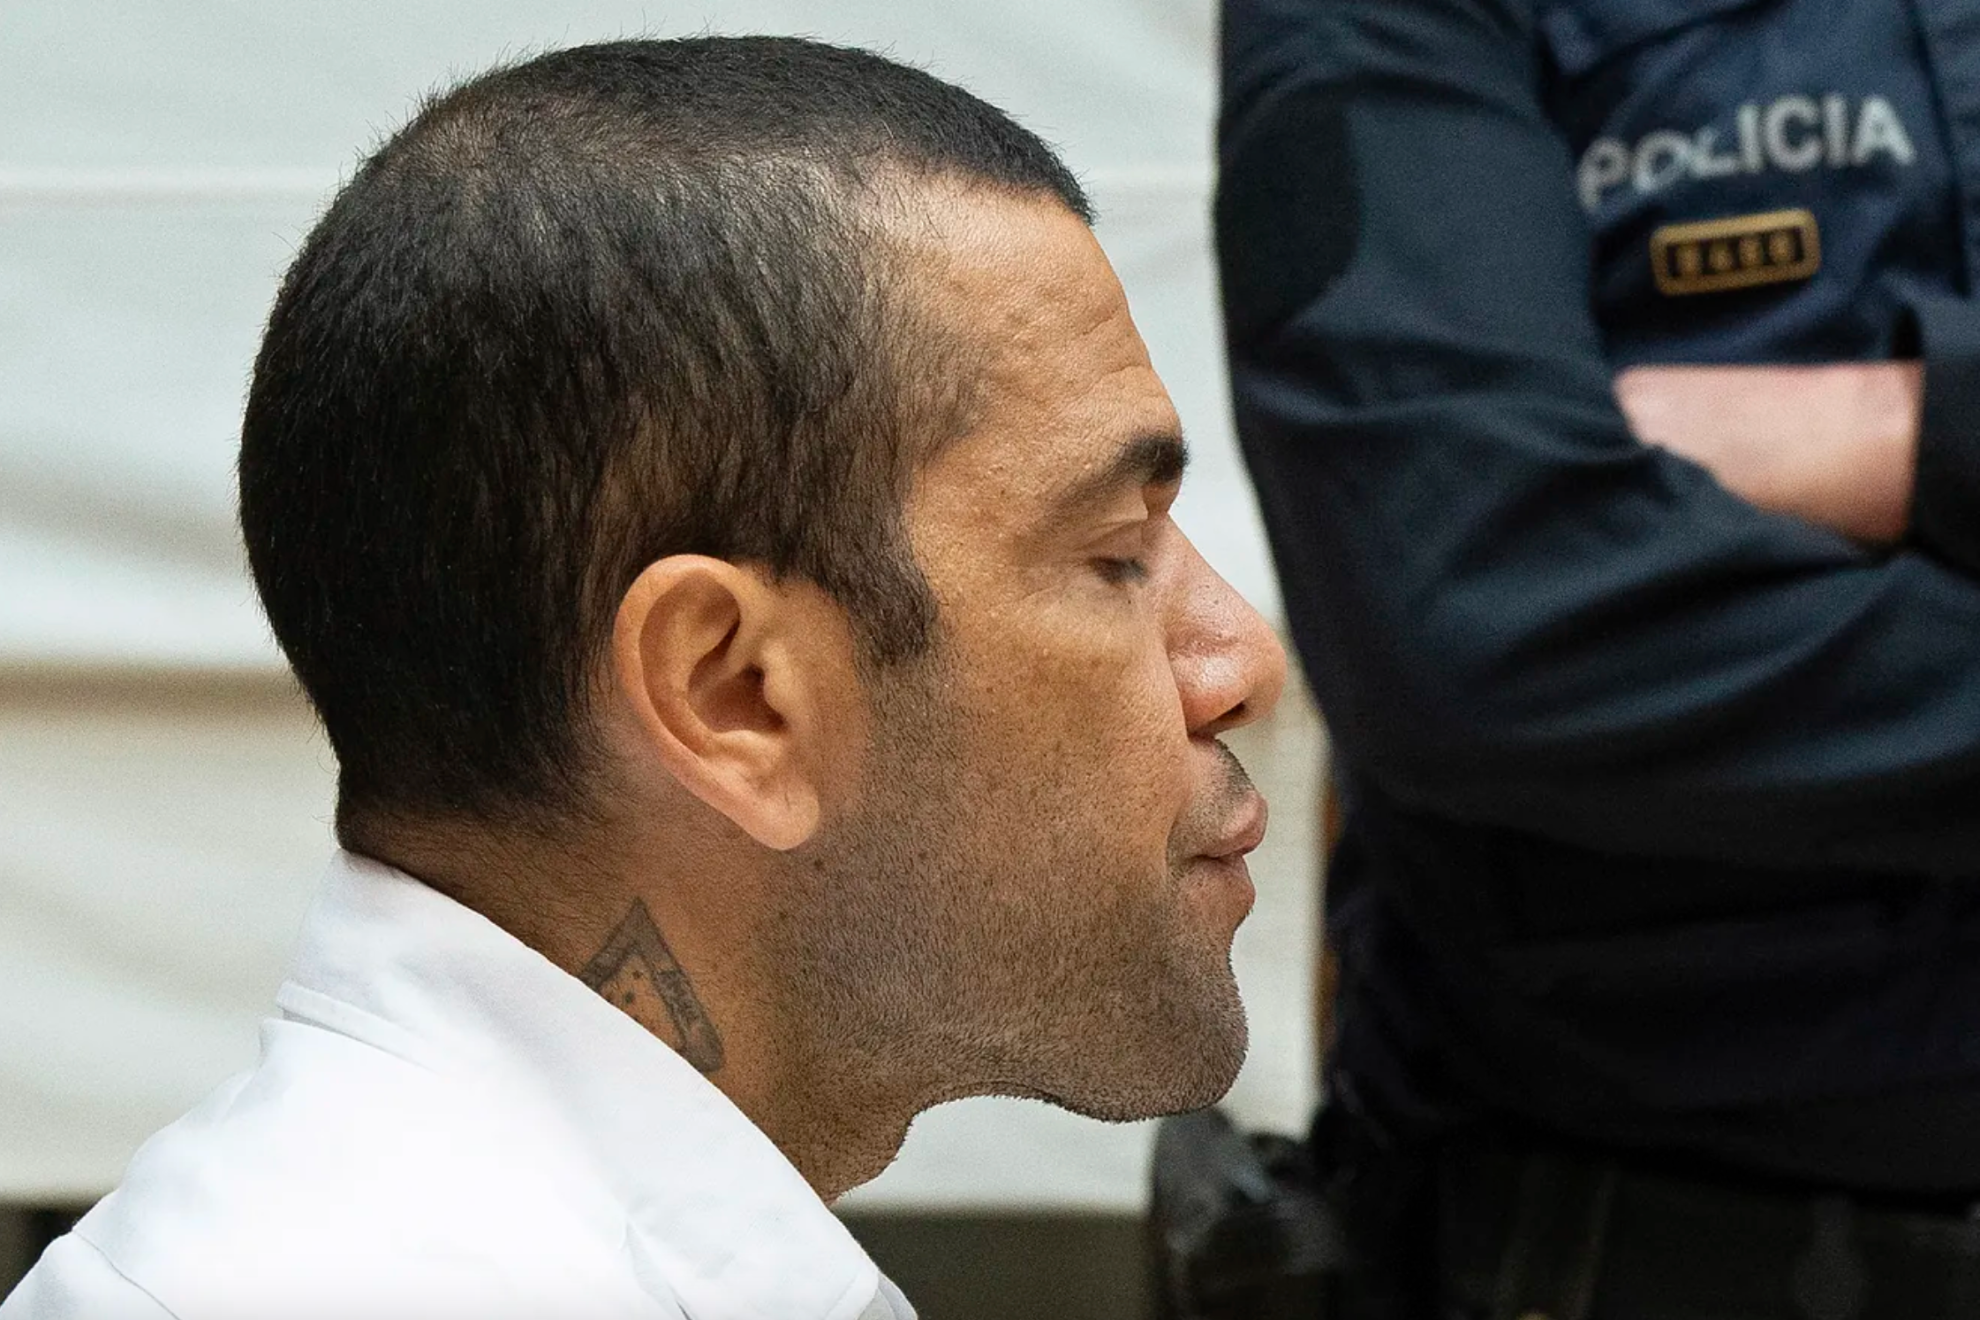 Dani Alves allegedly revealed his plan to escape from prison to a former teammate